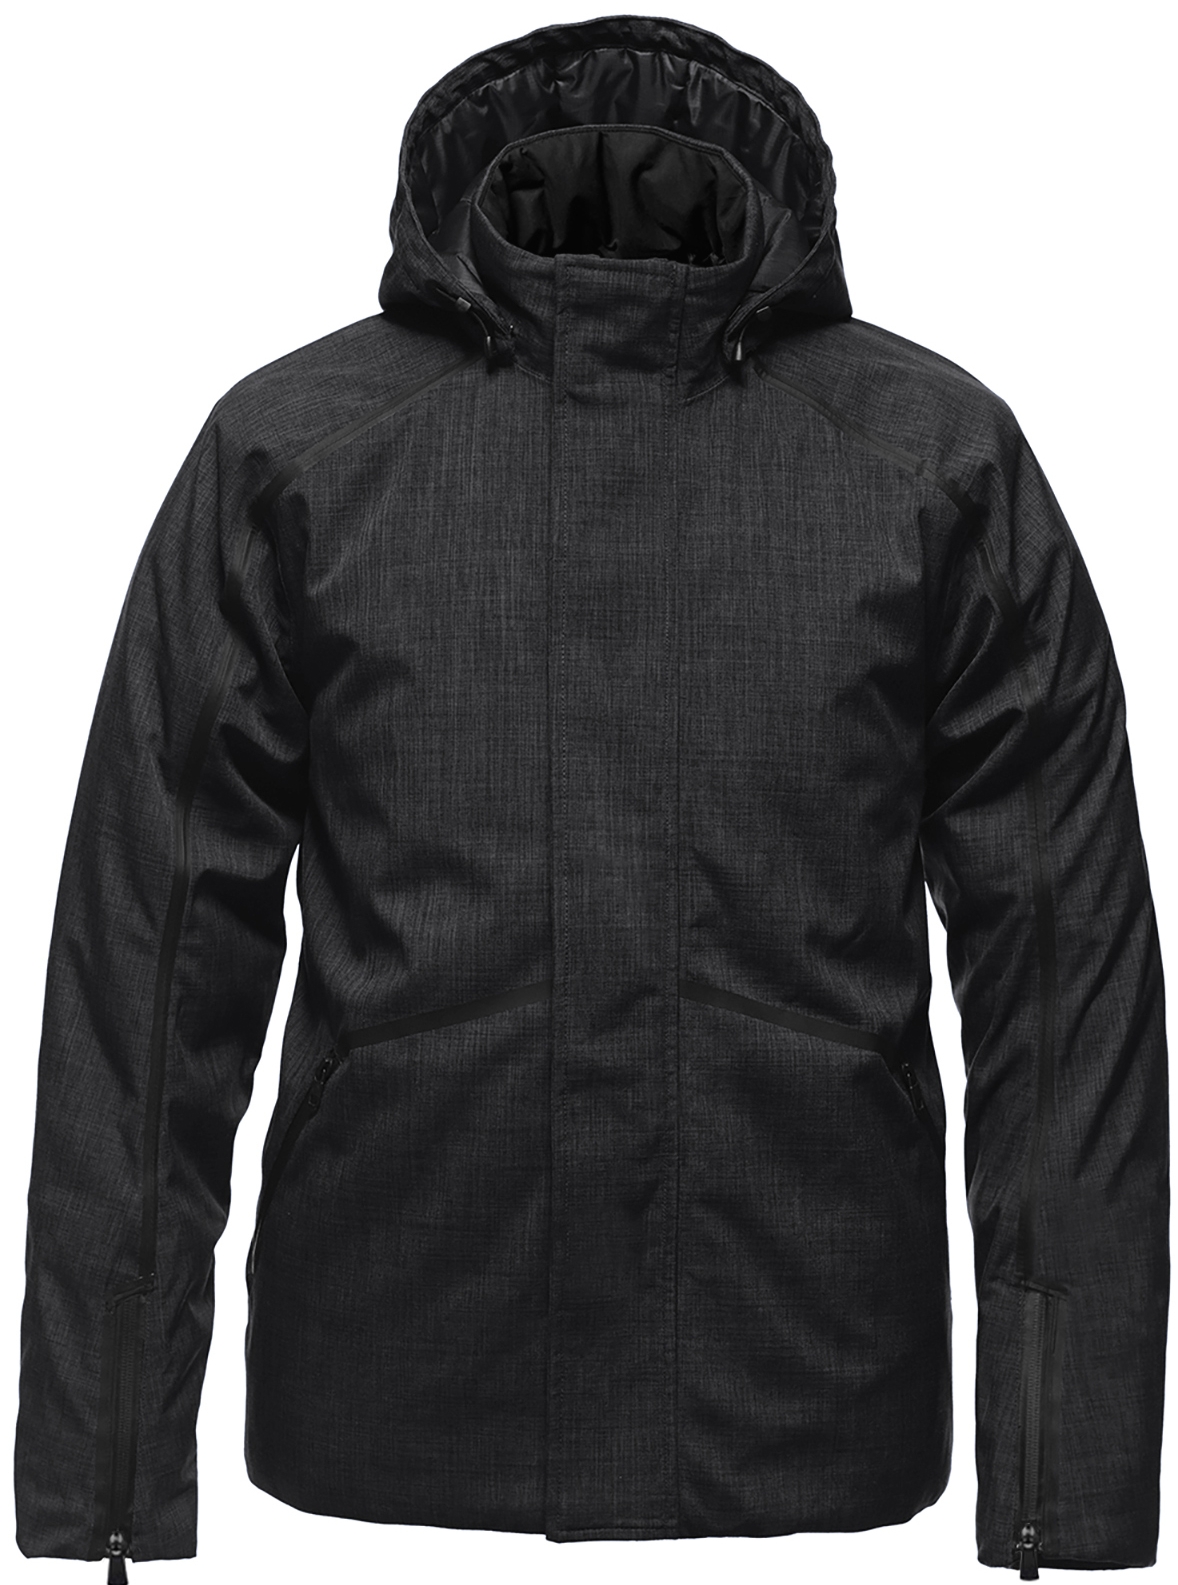 Aether Passage Jacket, $625